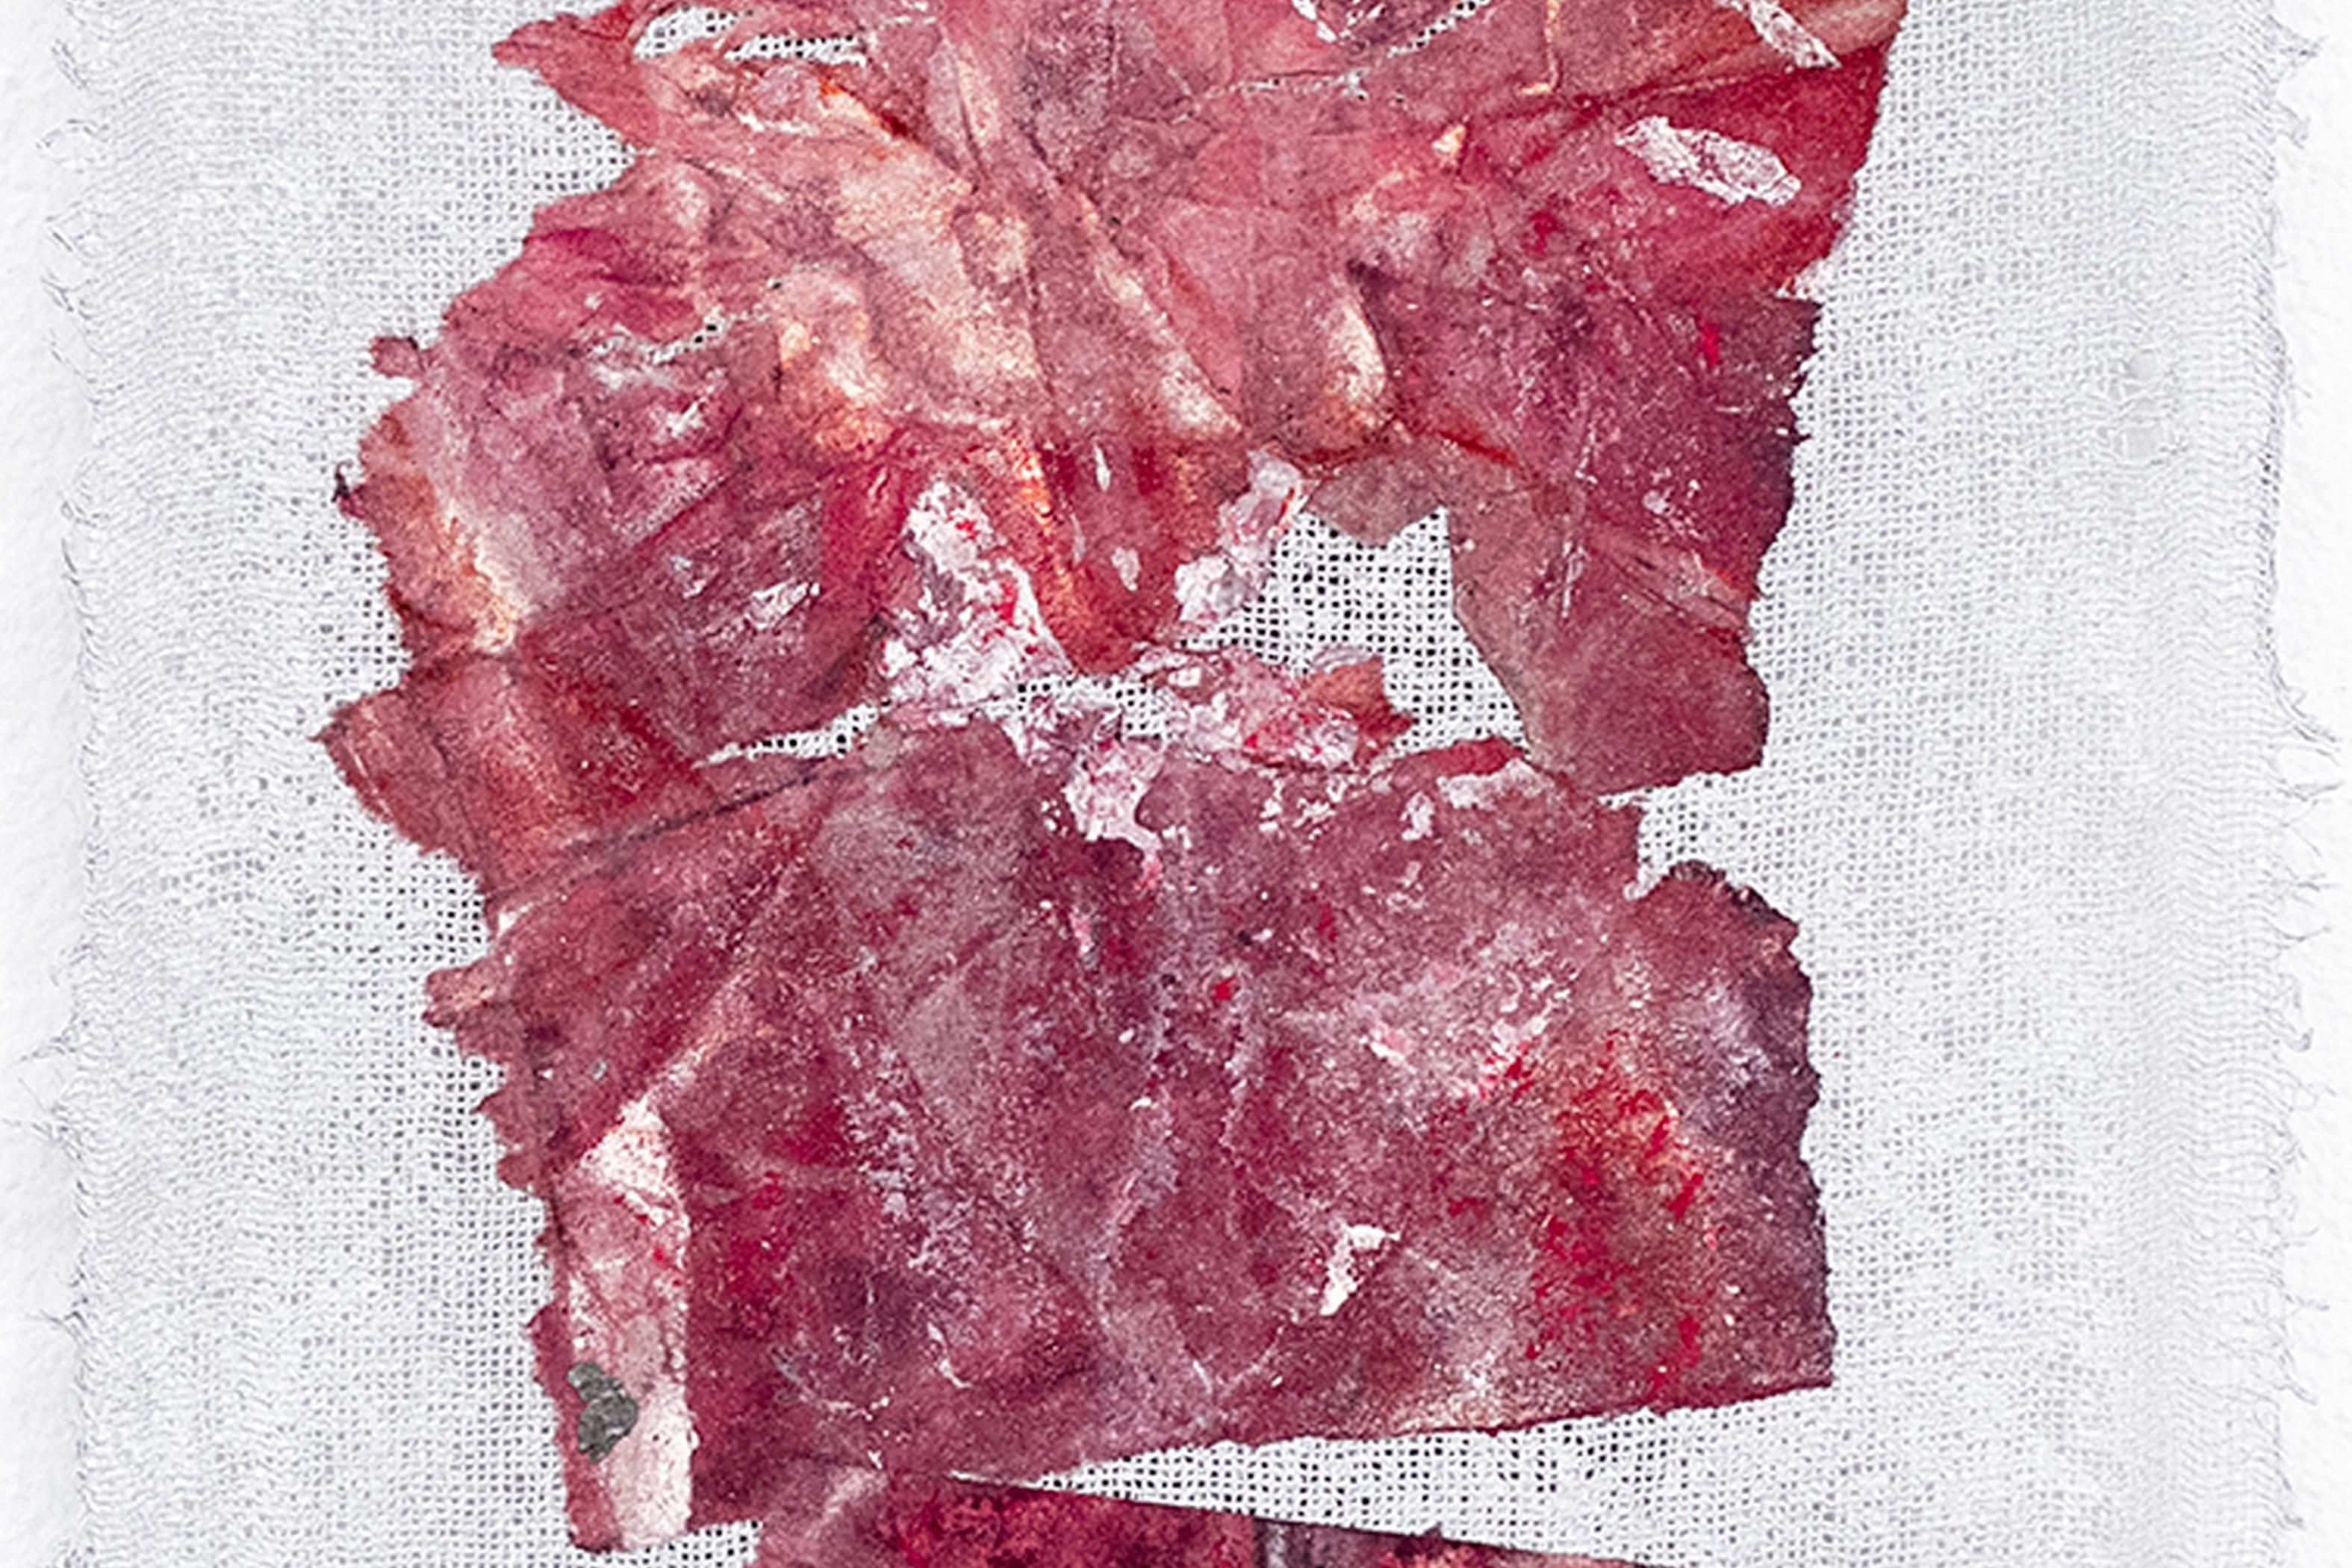 Flesh, Mulberry paper and acrylic on gauze For Sale 3